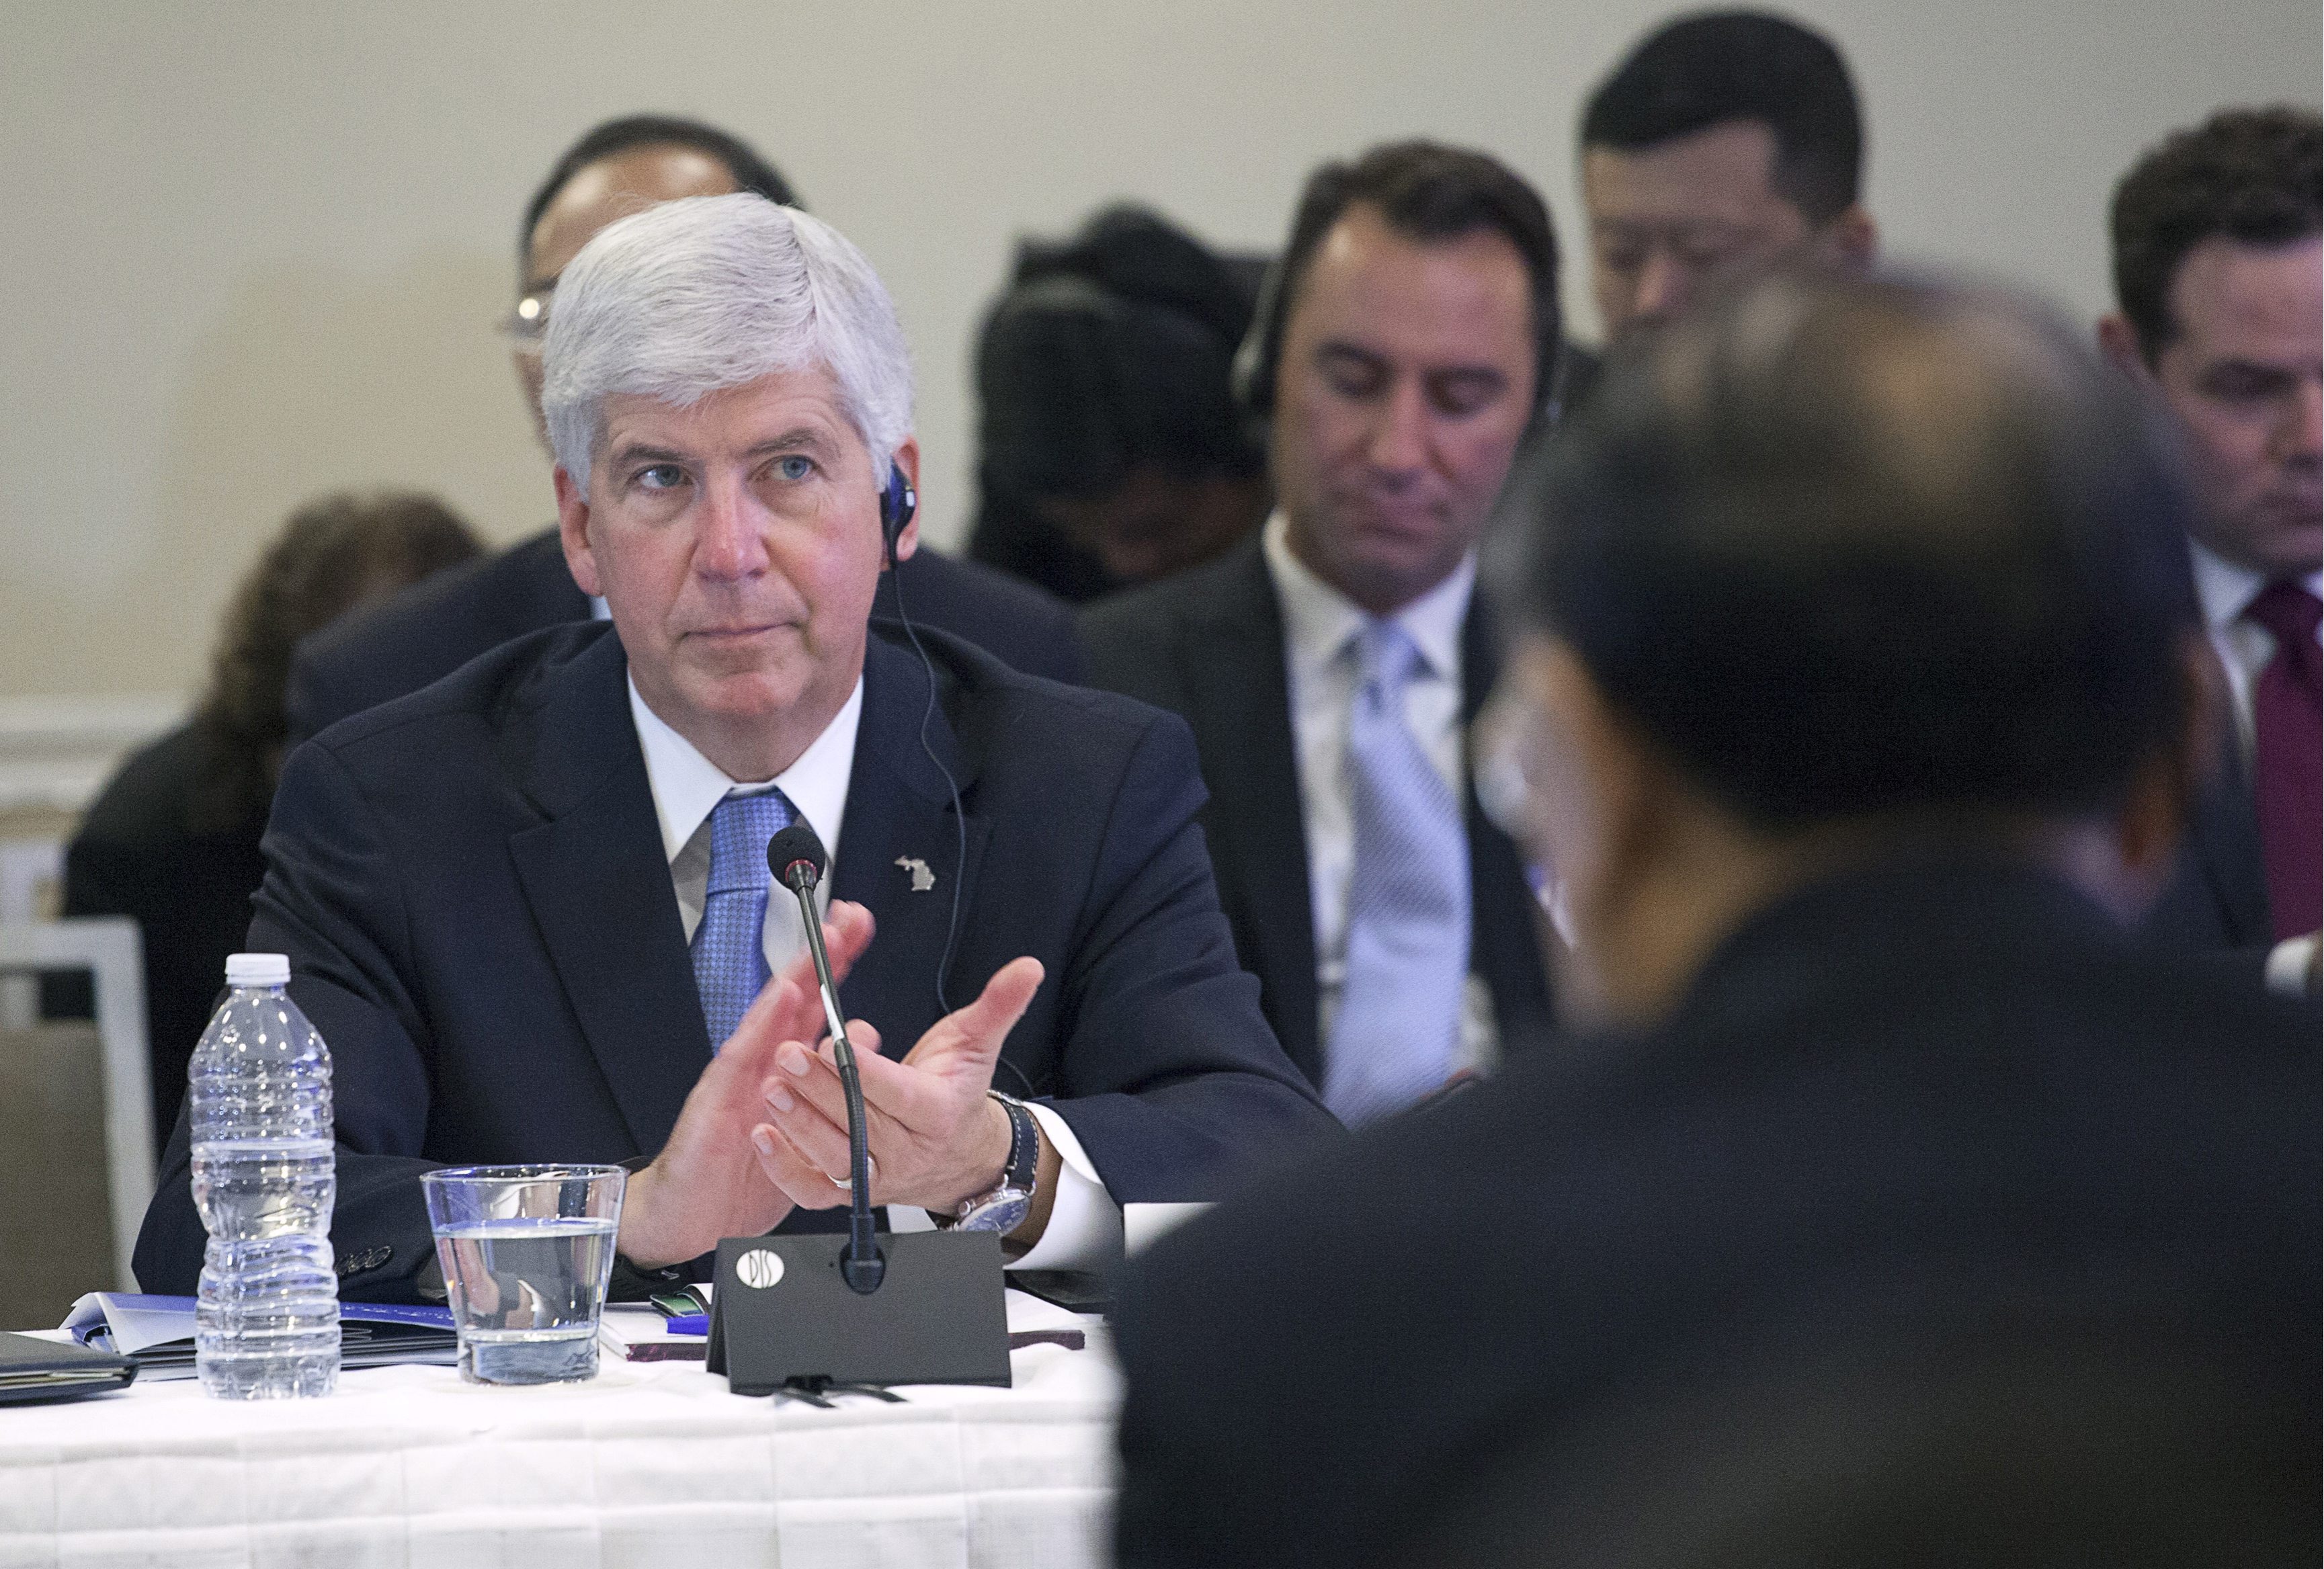 Governor Rick Snyder of Michigan applauds at a meeting with Chinese President Xi Jinping and four other United States governors to discuss clean technology and economic development in Seattle, Washington September 22, 2015. Xi landed in Seattle on Tuesday to kick off a week-long U.S. visit that will include meetings with U.S. business leaders, a black-tie state dinner at the White House hosted by President Barack Obama and an address at the United Nations. REUTERS/Matt Mills McKnightCODE: X02902